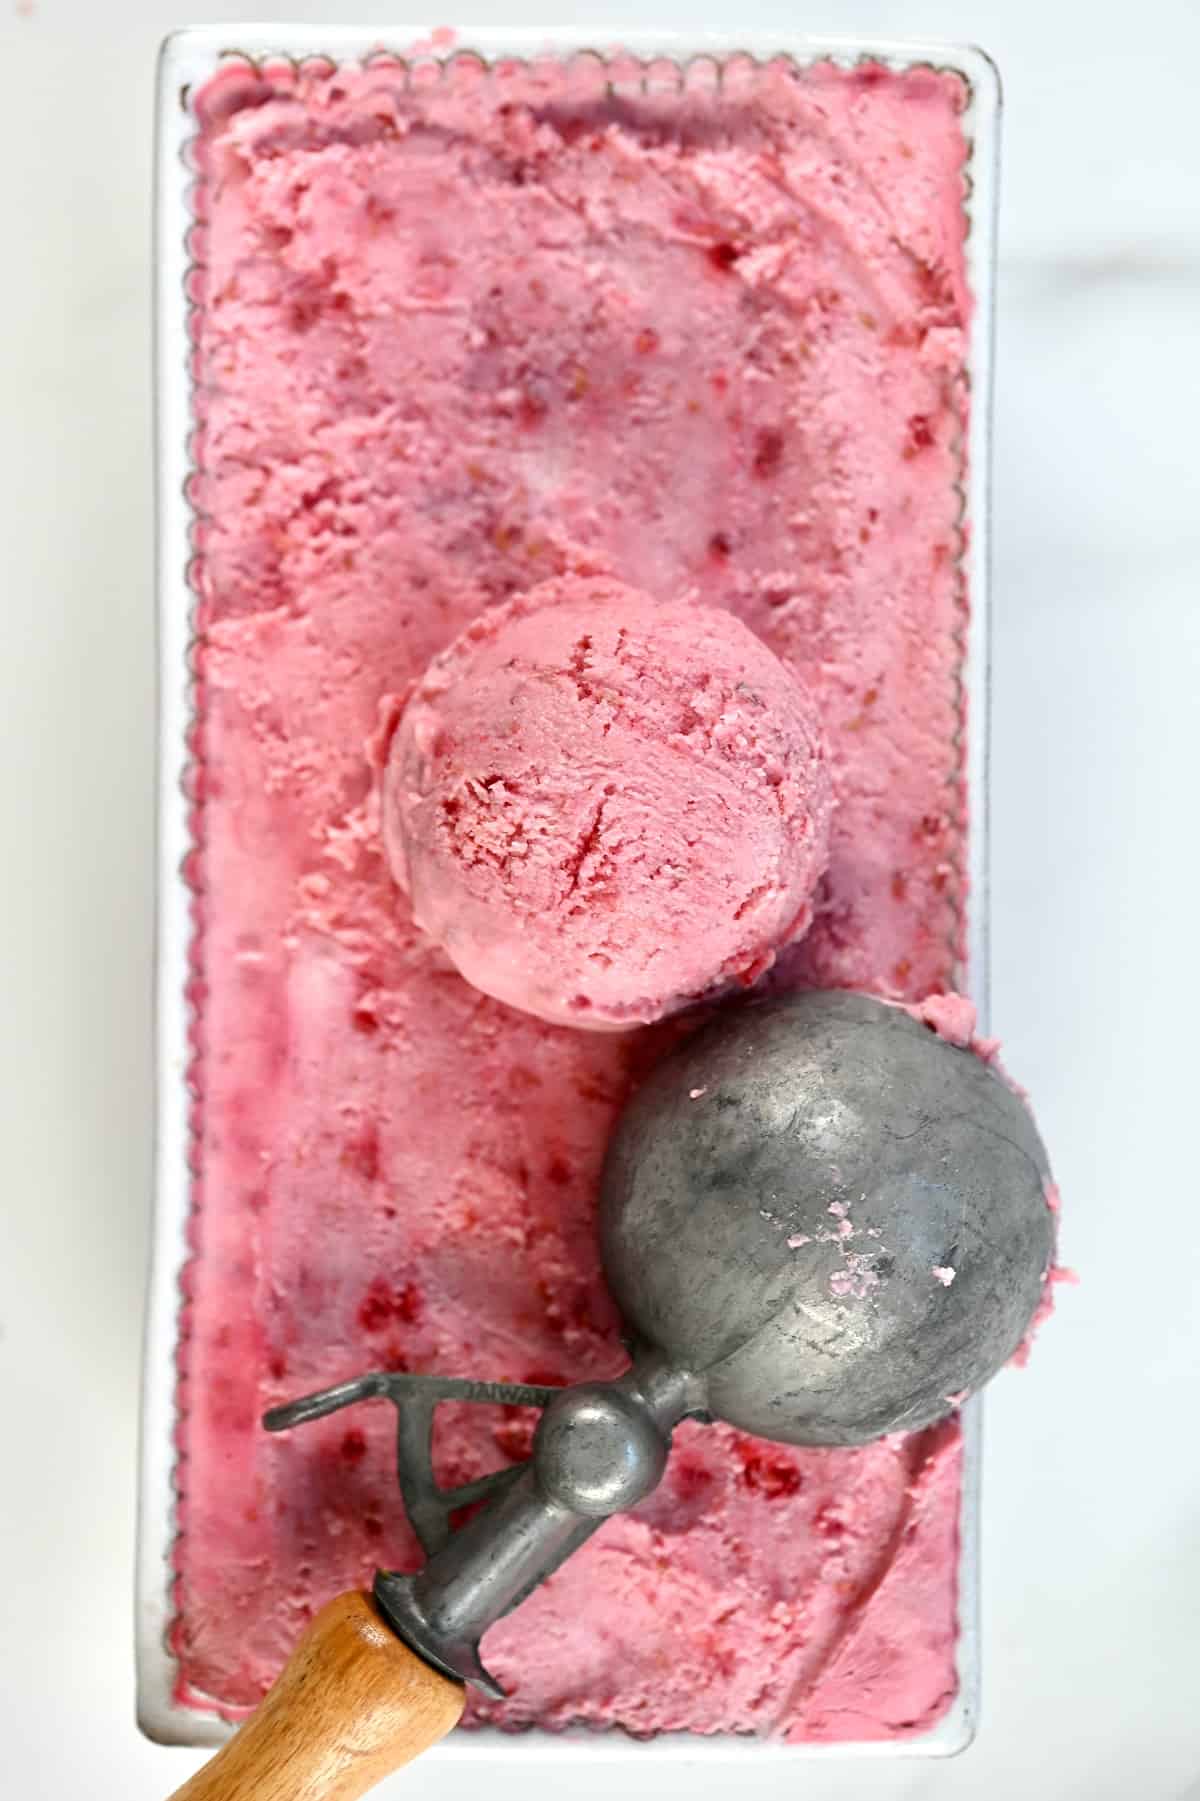 Raspberry Ice Cream in a glass white container with an ice cream scoop